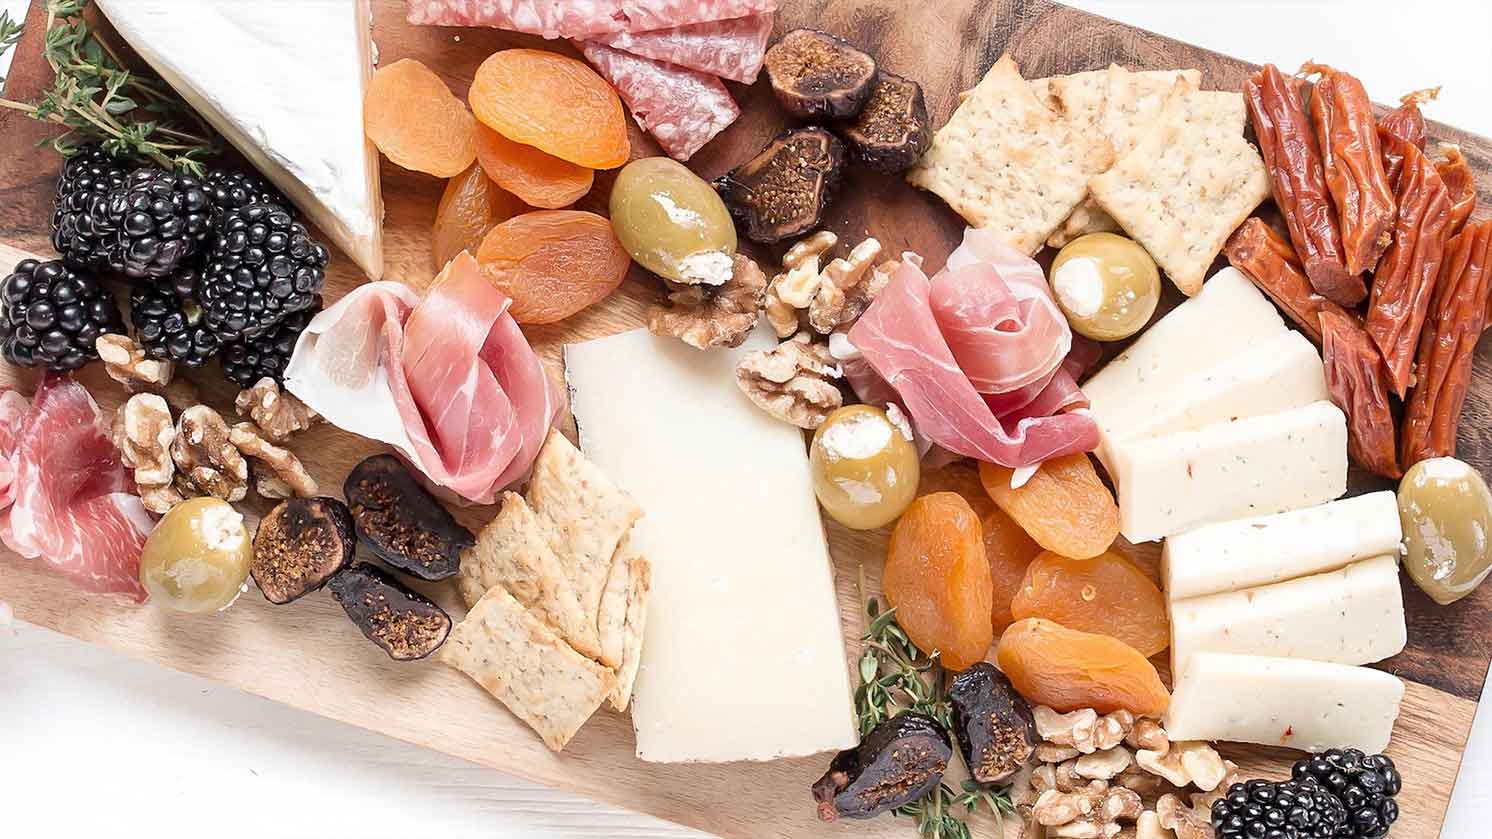 Healthy Charcuterie Board for a Healthy Date Night